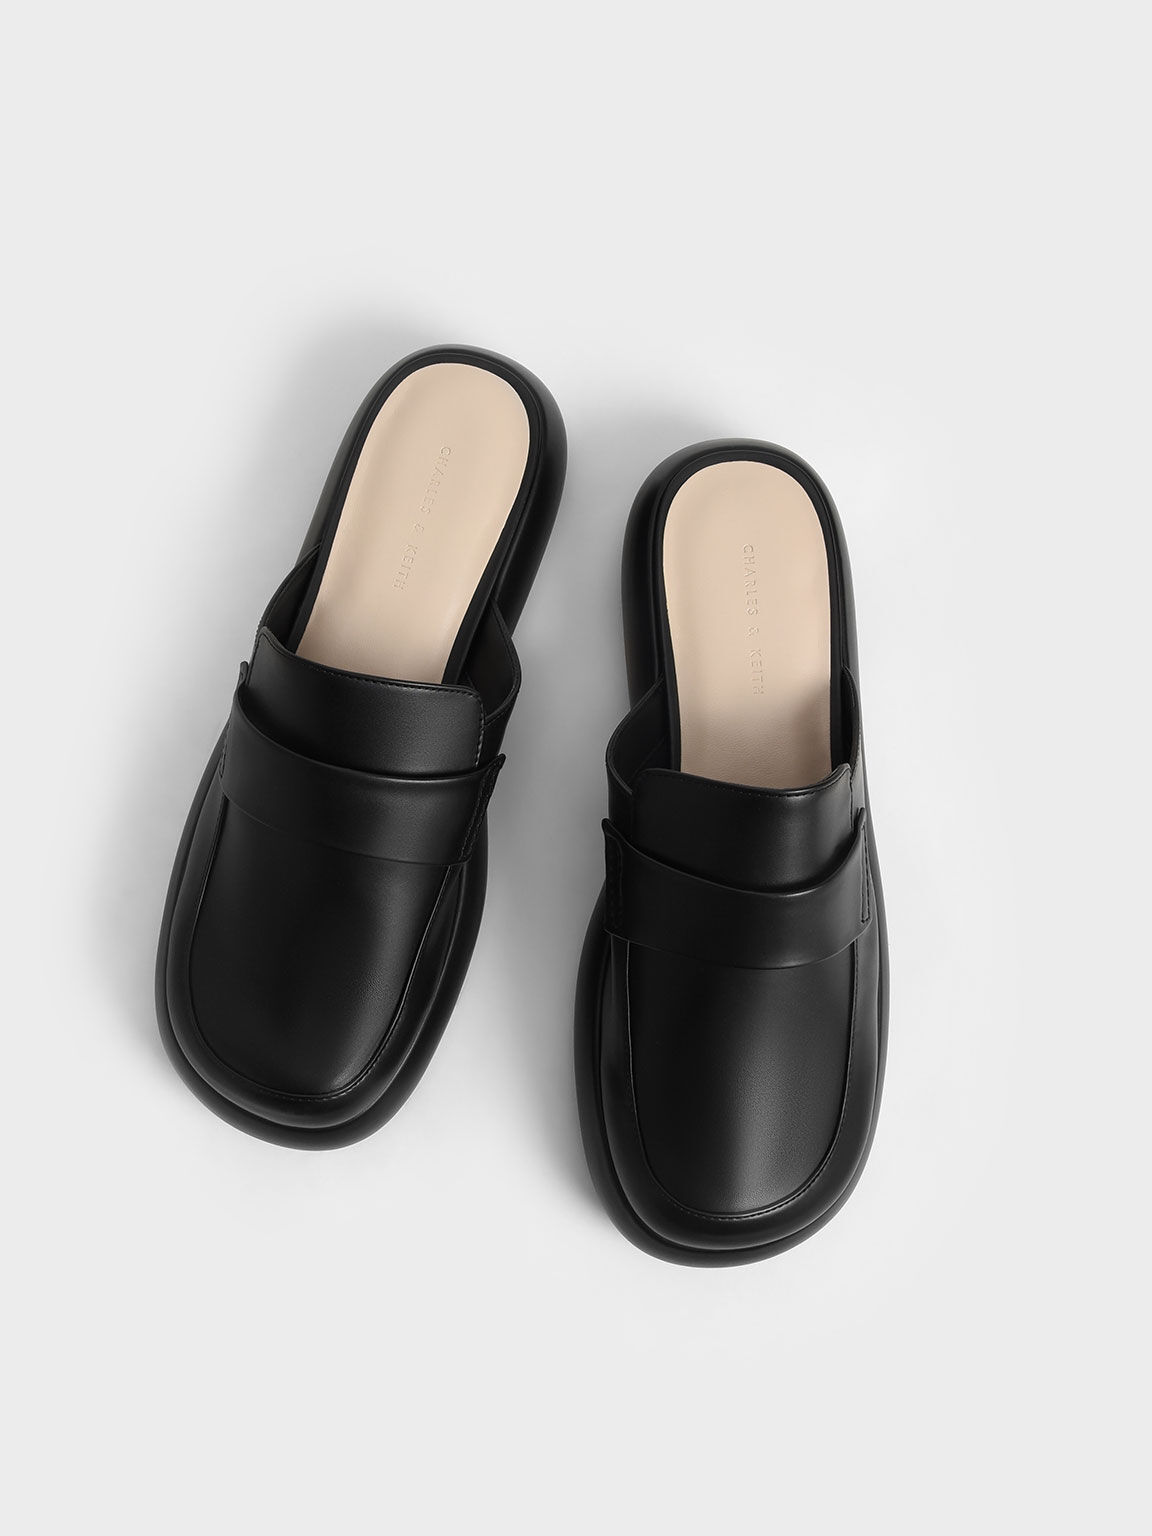 Black Rory Platform Penny Loafer Mules - CHARLES & KEITH KH